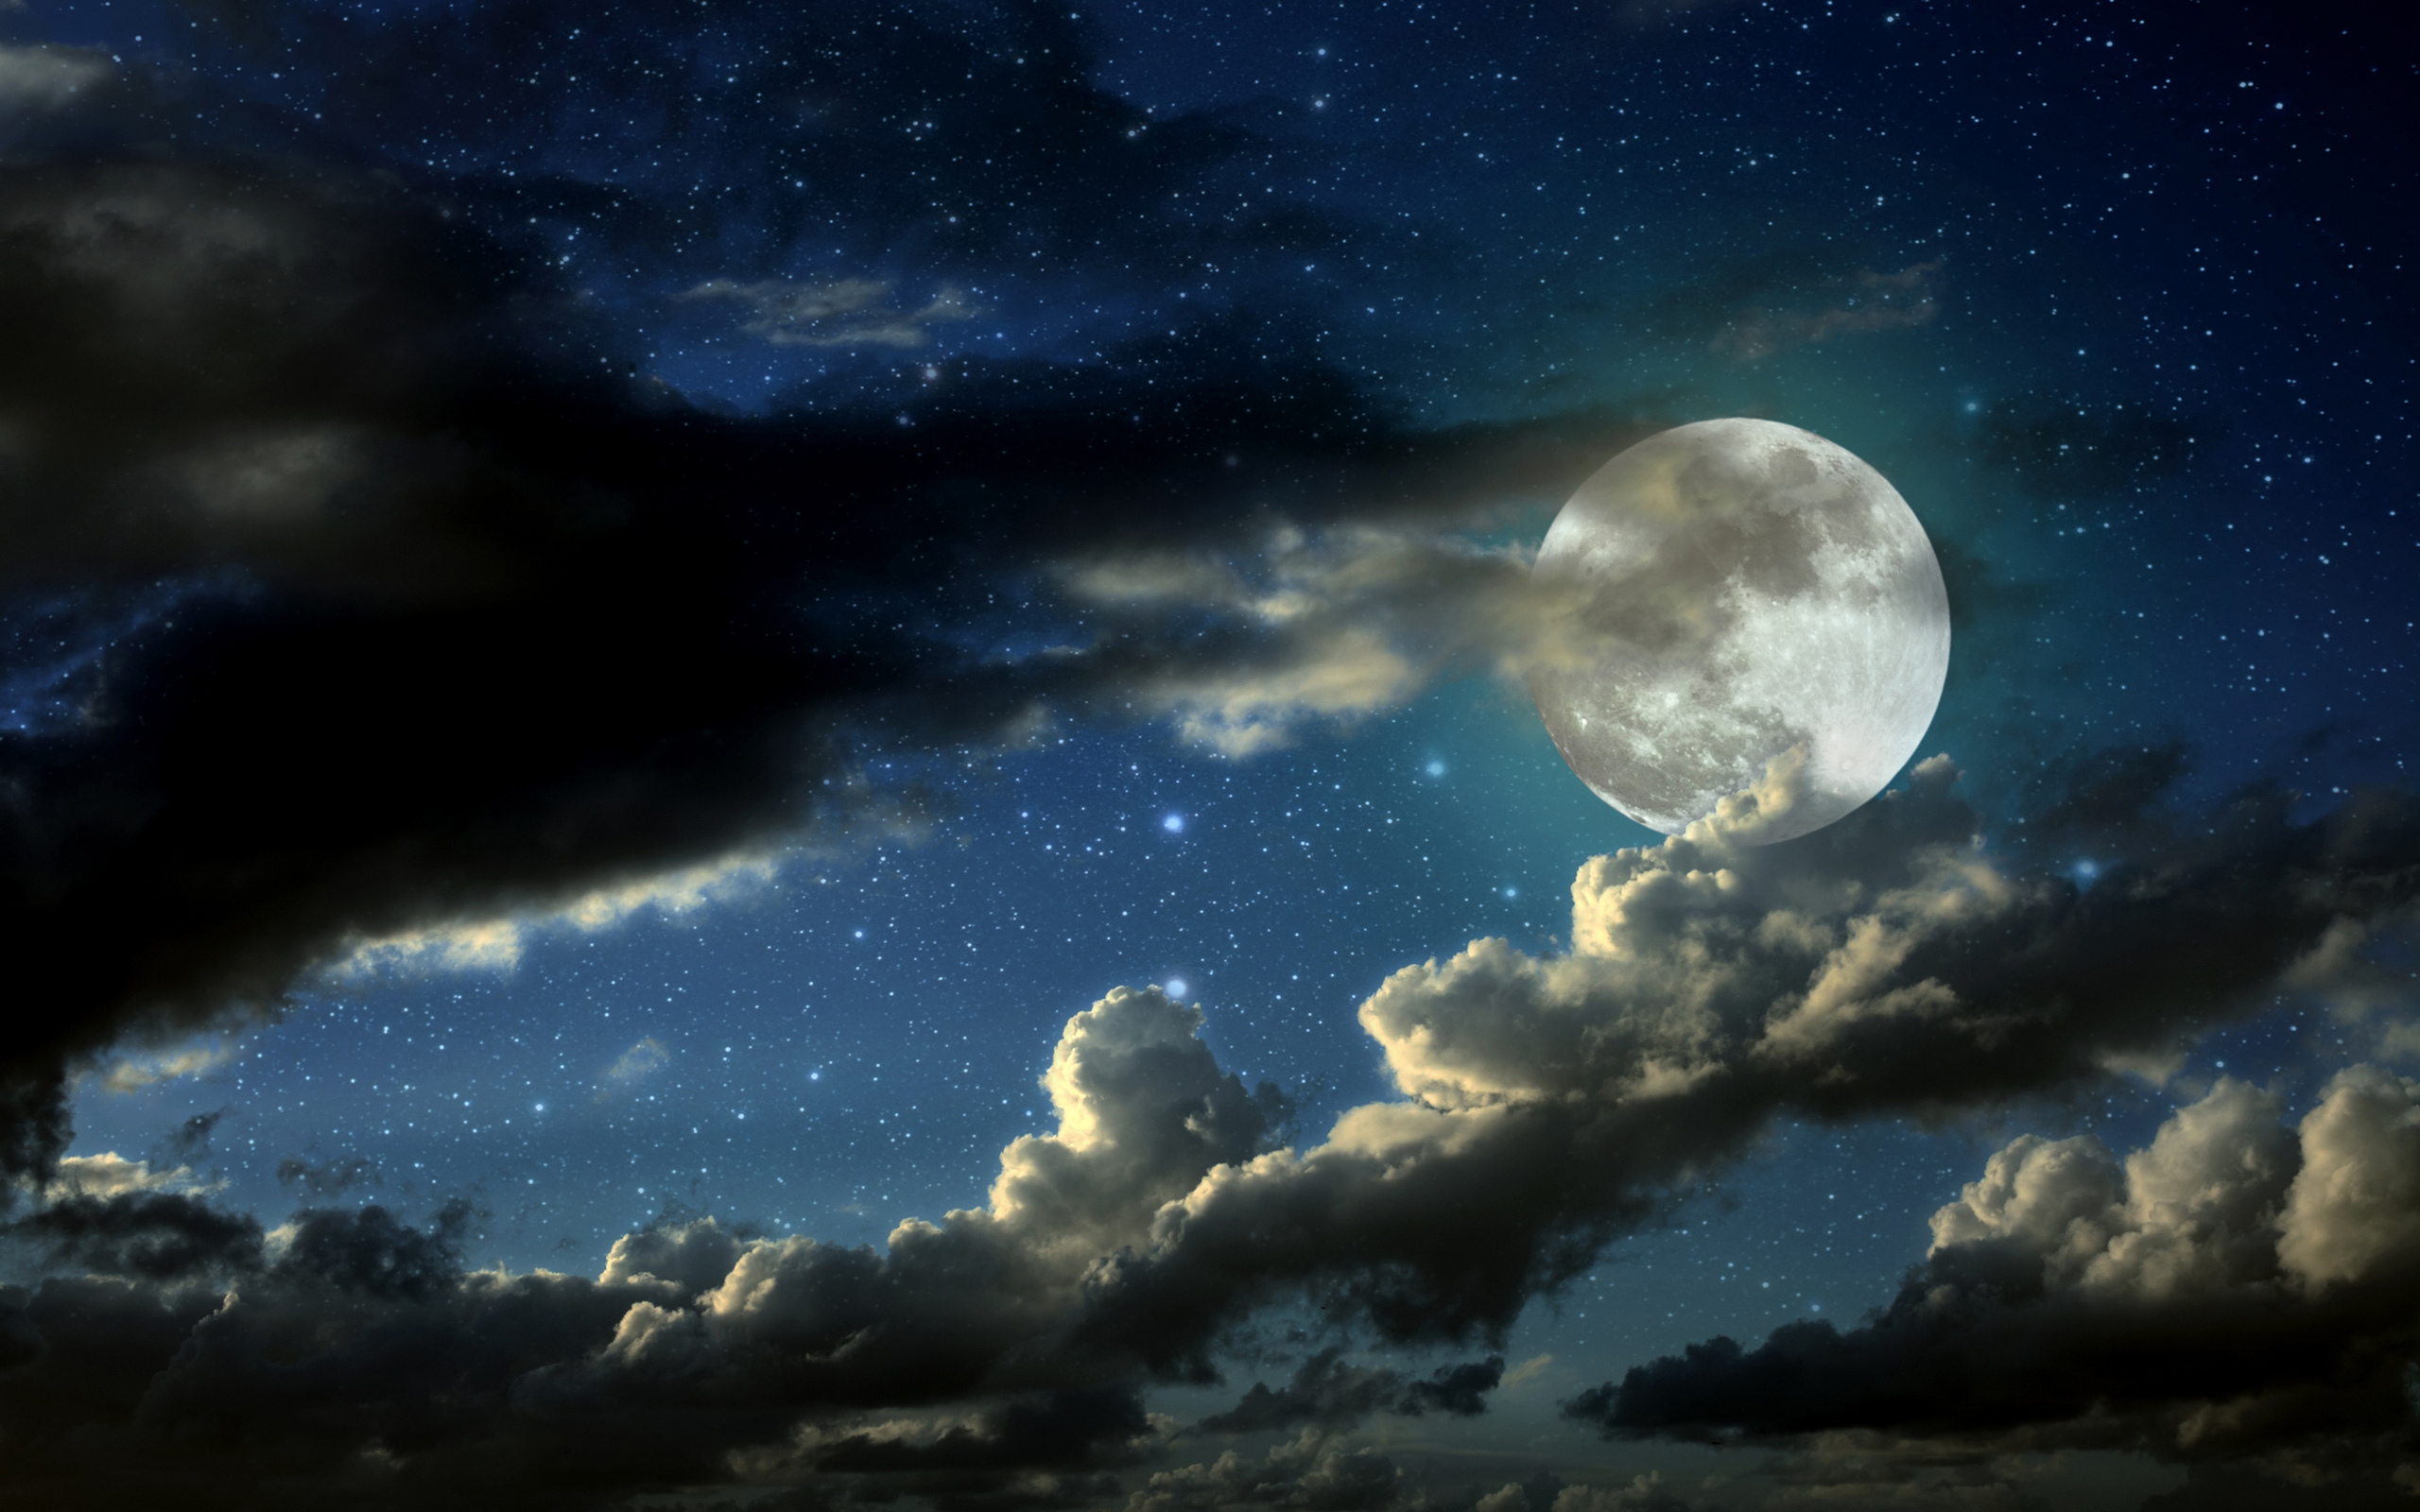  Nature HD Wallpapers Night Sky Moon Stars Clouds Wallpaper